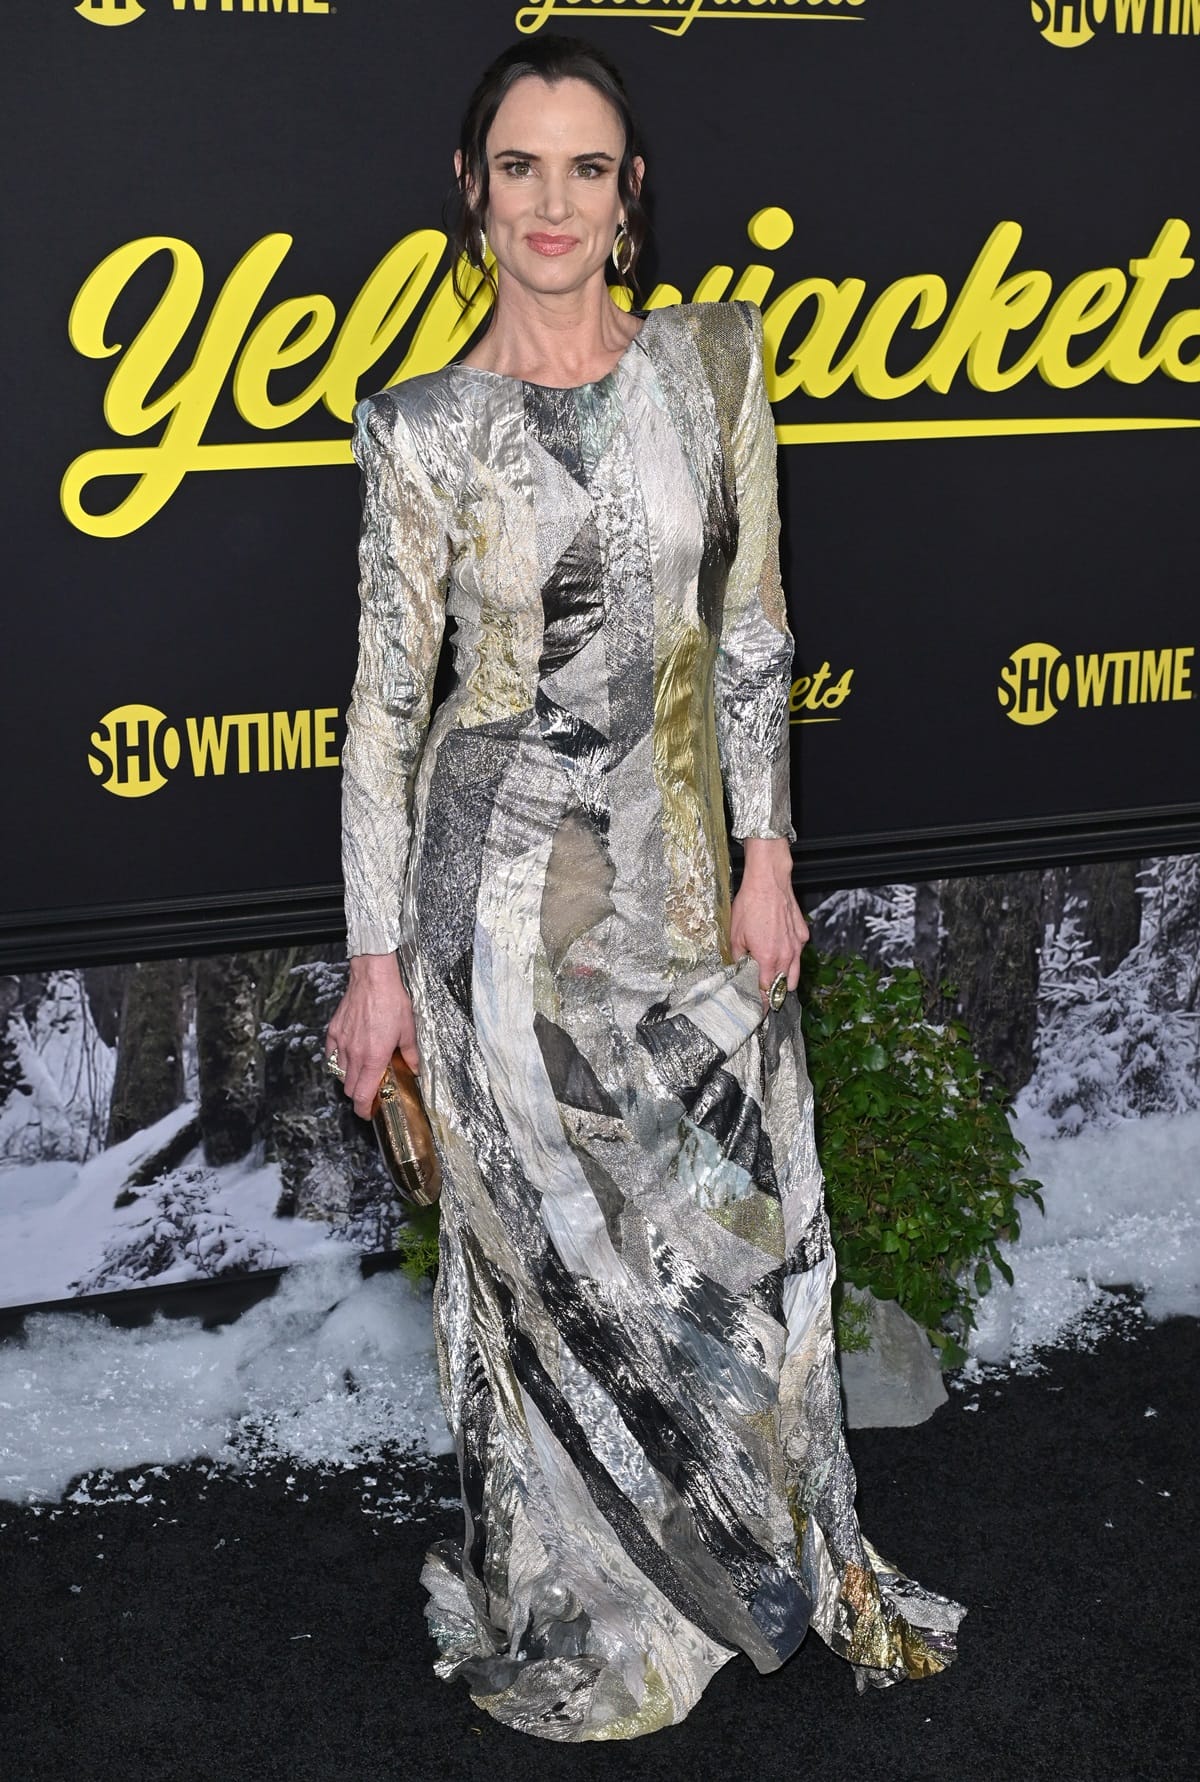 Juliette Lewis looked stunning in an Olivier Theyskens dress, styled by Dani + Emma, at the season 2 world premiere of Showtime's "Yellowjackets"